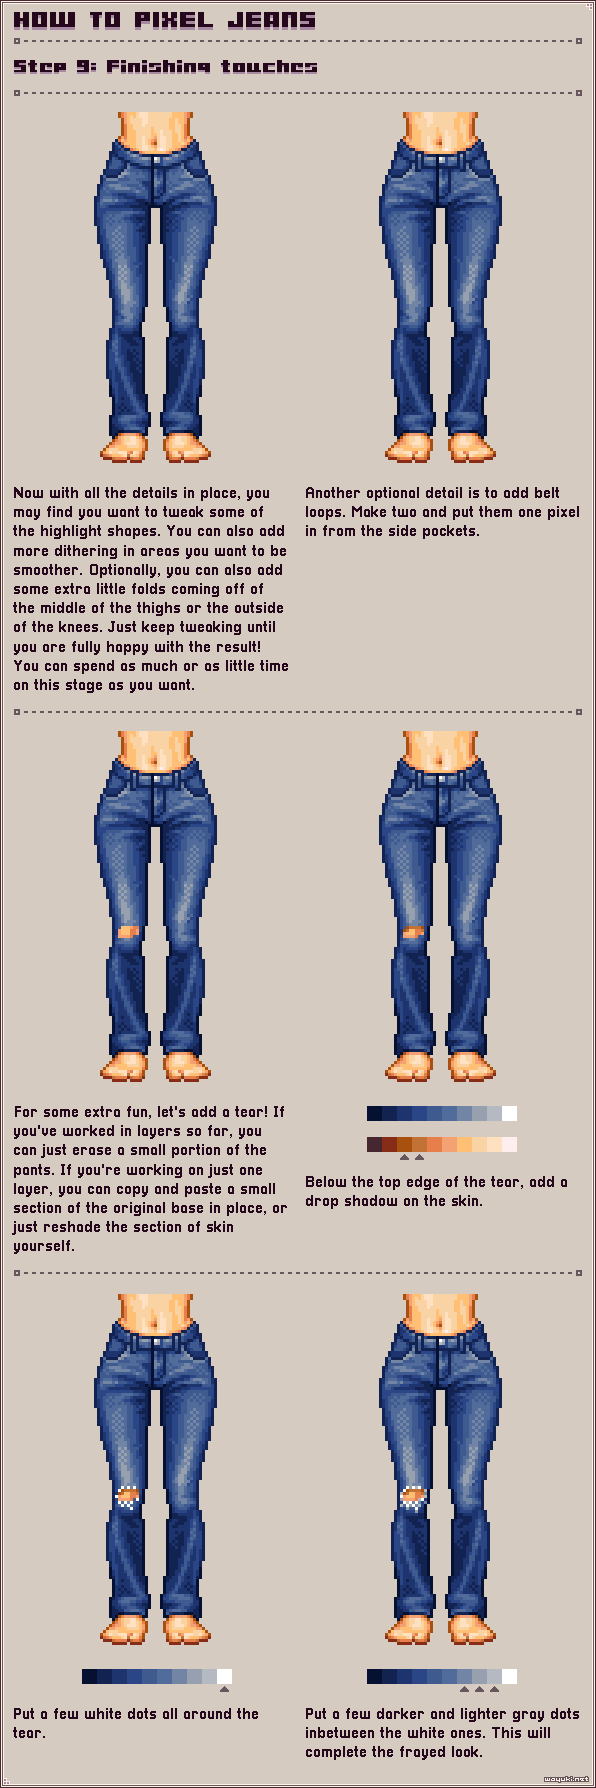 How to pixel jeans step 9